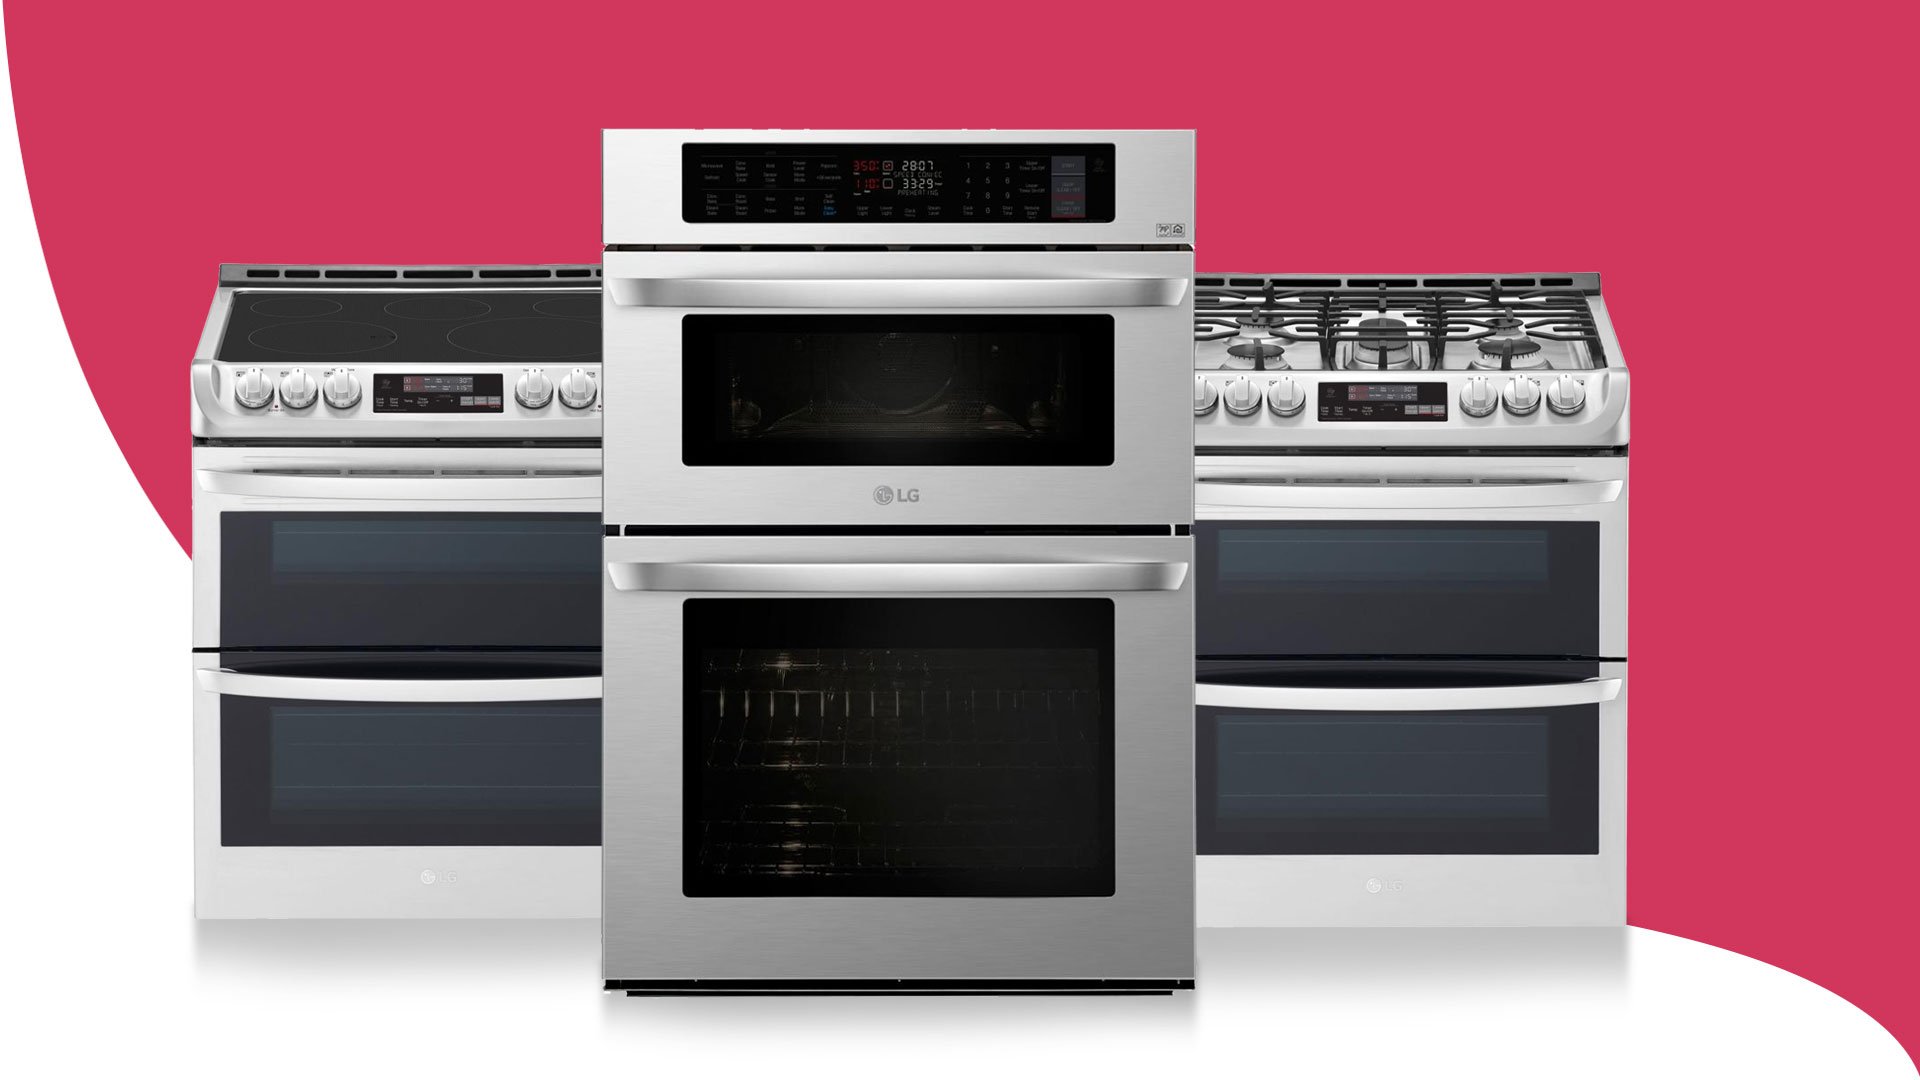 LG Range and Oven Repair | LG Appliance Service